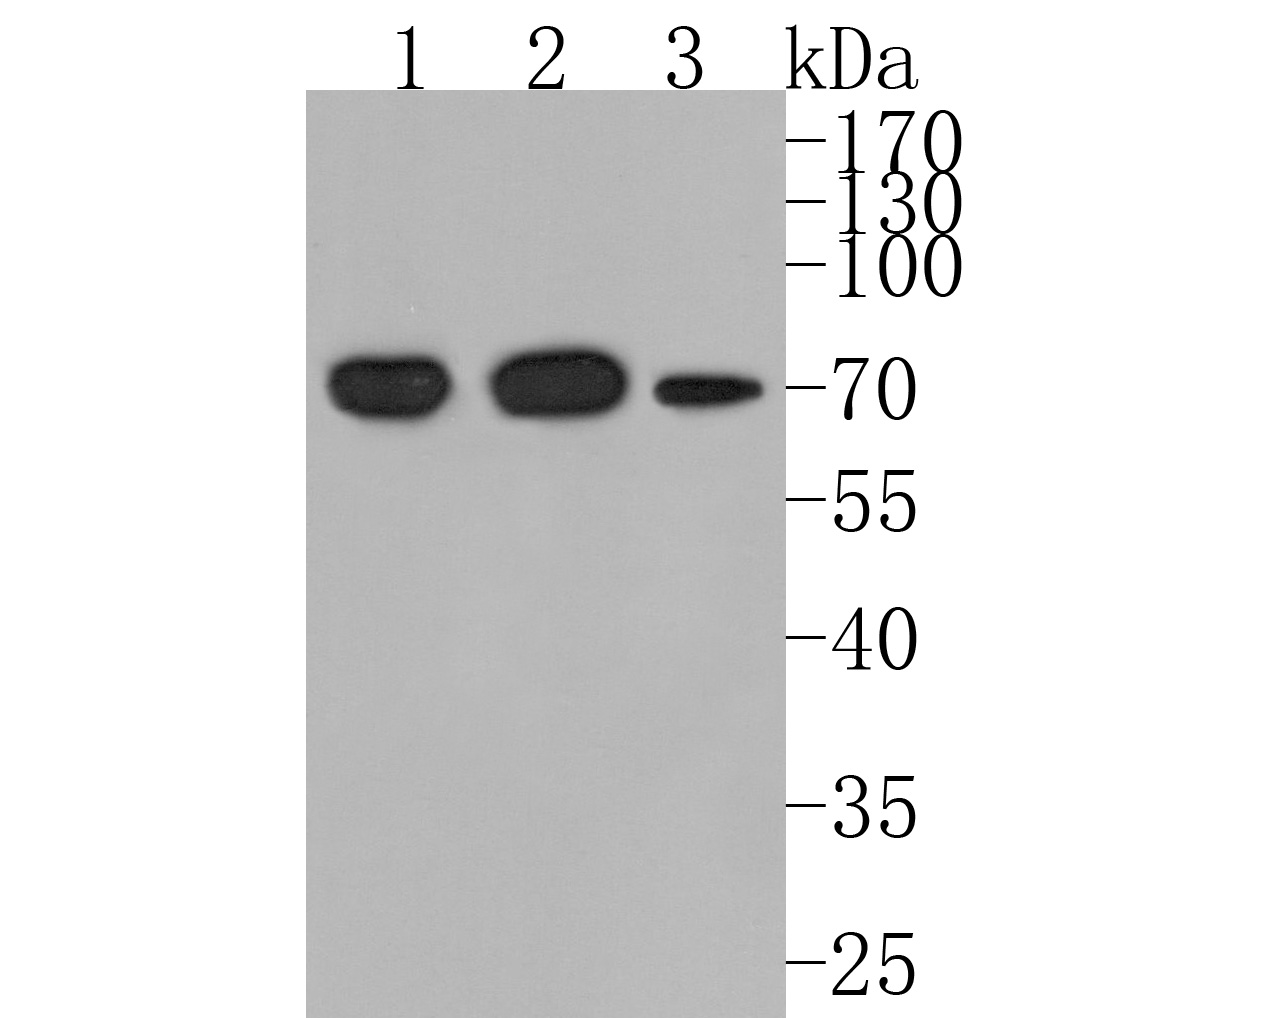 Western blot analysis of TAF15 on different lysates. Proteins were transferred to a PVDF membrane and blocked with 5% NFDM/TBST for 1 hour at room temperature. The primary antibody (HA720098, 1/500) was used in 5% NFDM/TBST at room temperature for 2 hours. Goat Anti-Rabbit IgG - HRP Secondary Antibody (HA1001) at 1:200,000 dilution was used for 1 hour at room temperature.<br />
Positive control: <br />
Lane 1: Daudi cell lysate<br />
Lane 2: HL-60 cell lysate<br />
Lane 3: A549 cell lysate